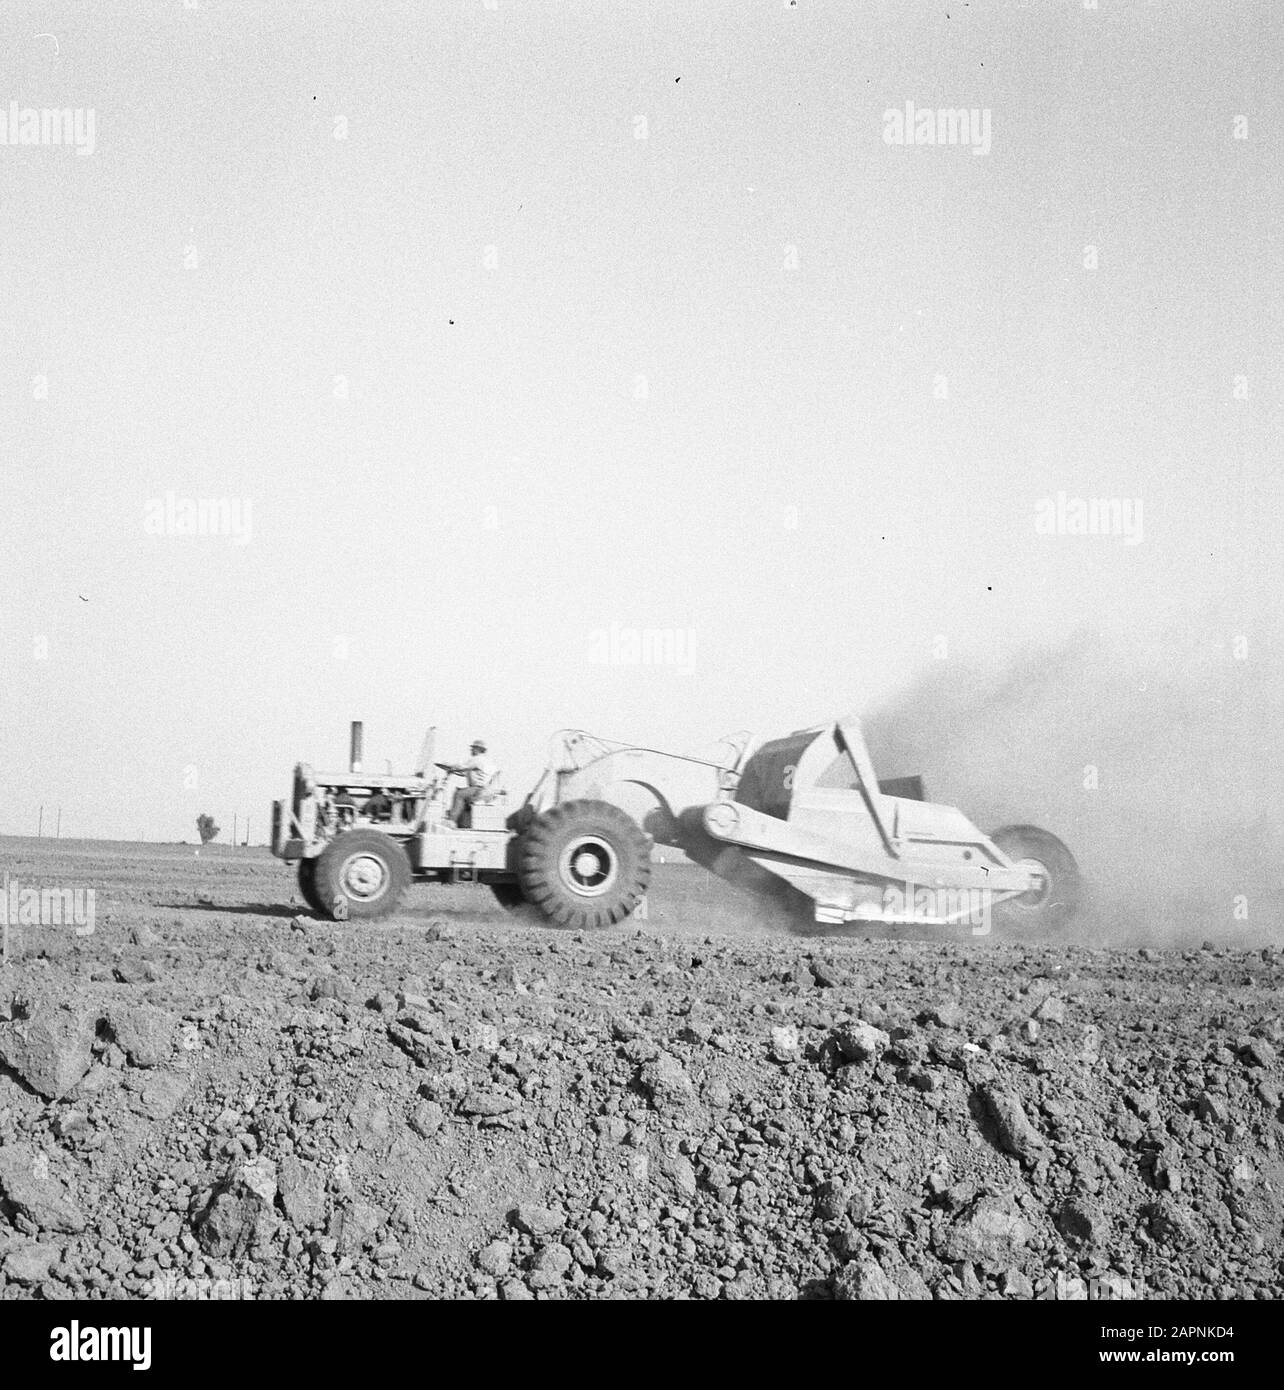 mining, tillage, leveling, shaving, workers, scrapers Date: November 1960 Keywords: workers, squirts, leveling, tillage, mining, extrination, scrapers Stock Photo